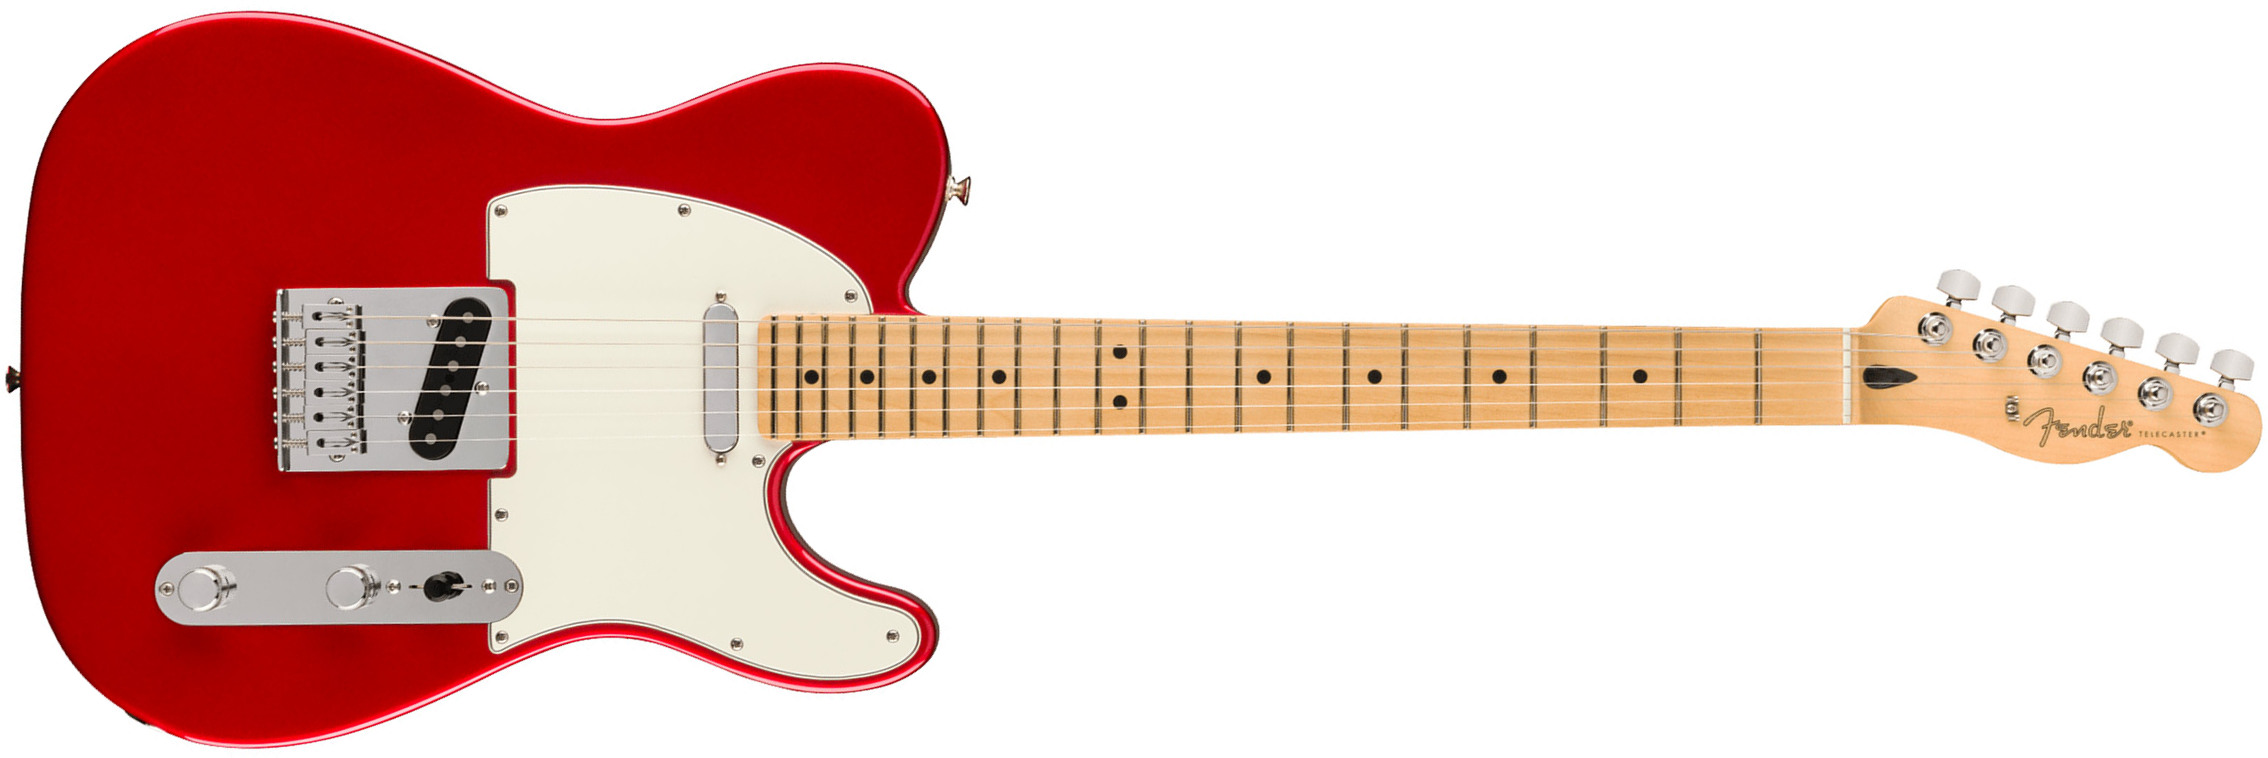 Fender Tele Player Mex 2023 2s Ht Mn - Candy Apple Red - Tel shape electric guitar - Main picture